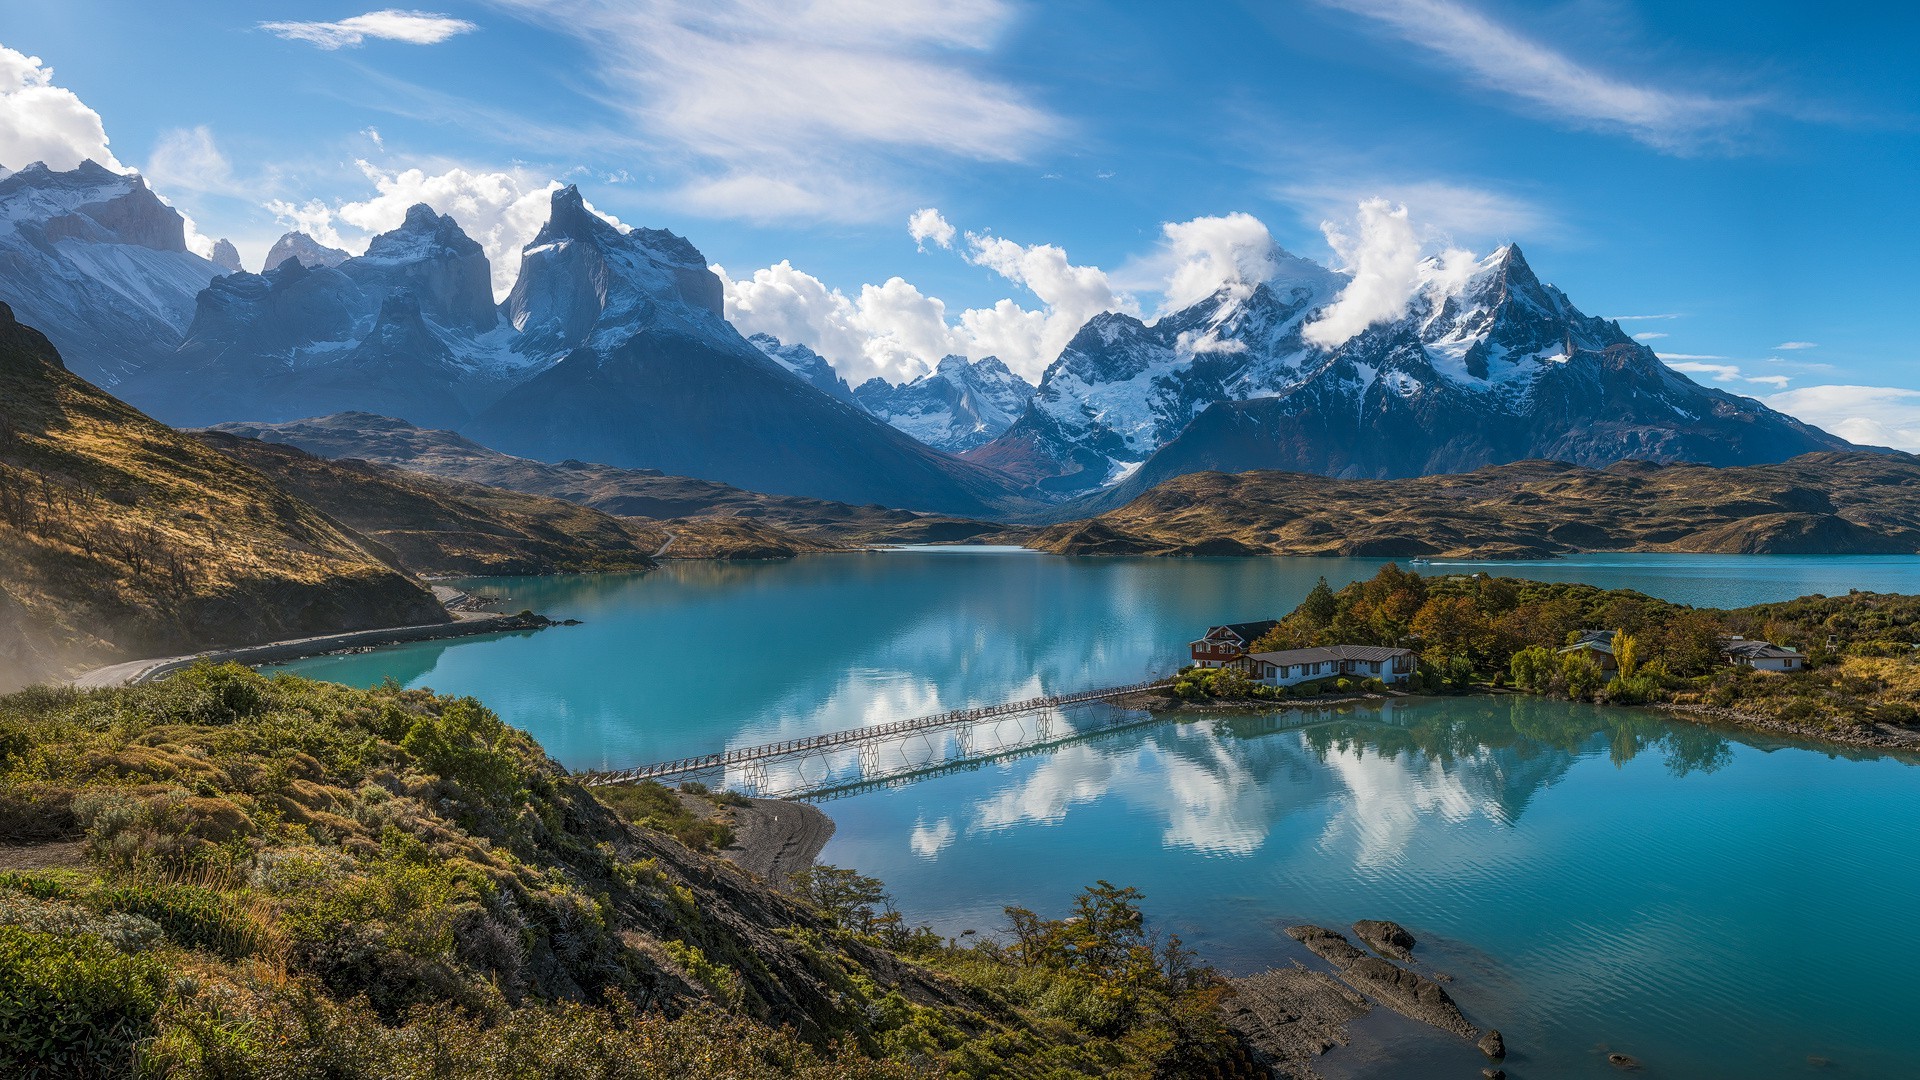 1920x1080 Torres Del Paine, Patagonia, Chile, Mountain, Lake, Shrubs, Road, Snowy  Peak, Clouds, Hotels, Bridge, Water, Blue, Turquoise, Nature, Landscape  Wallpapers ...